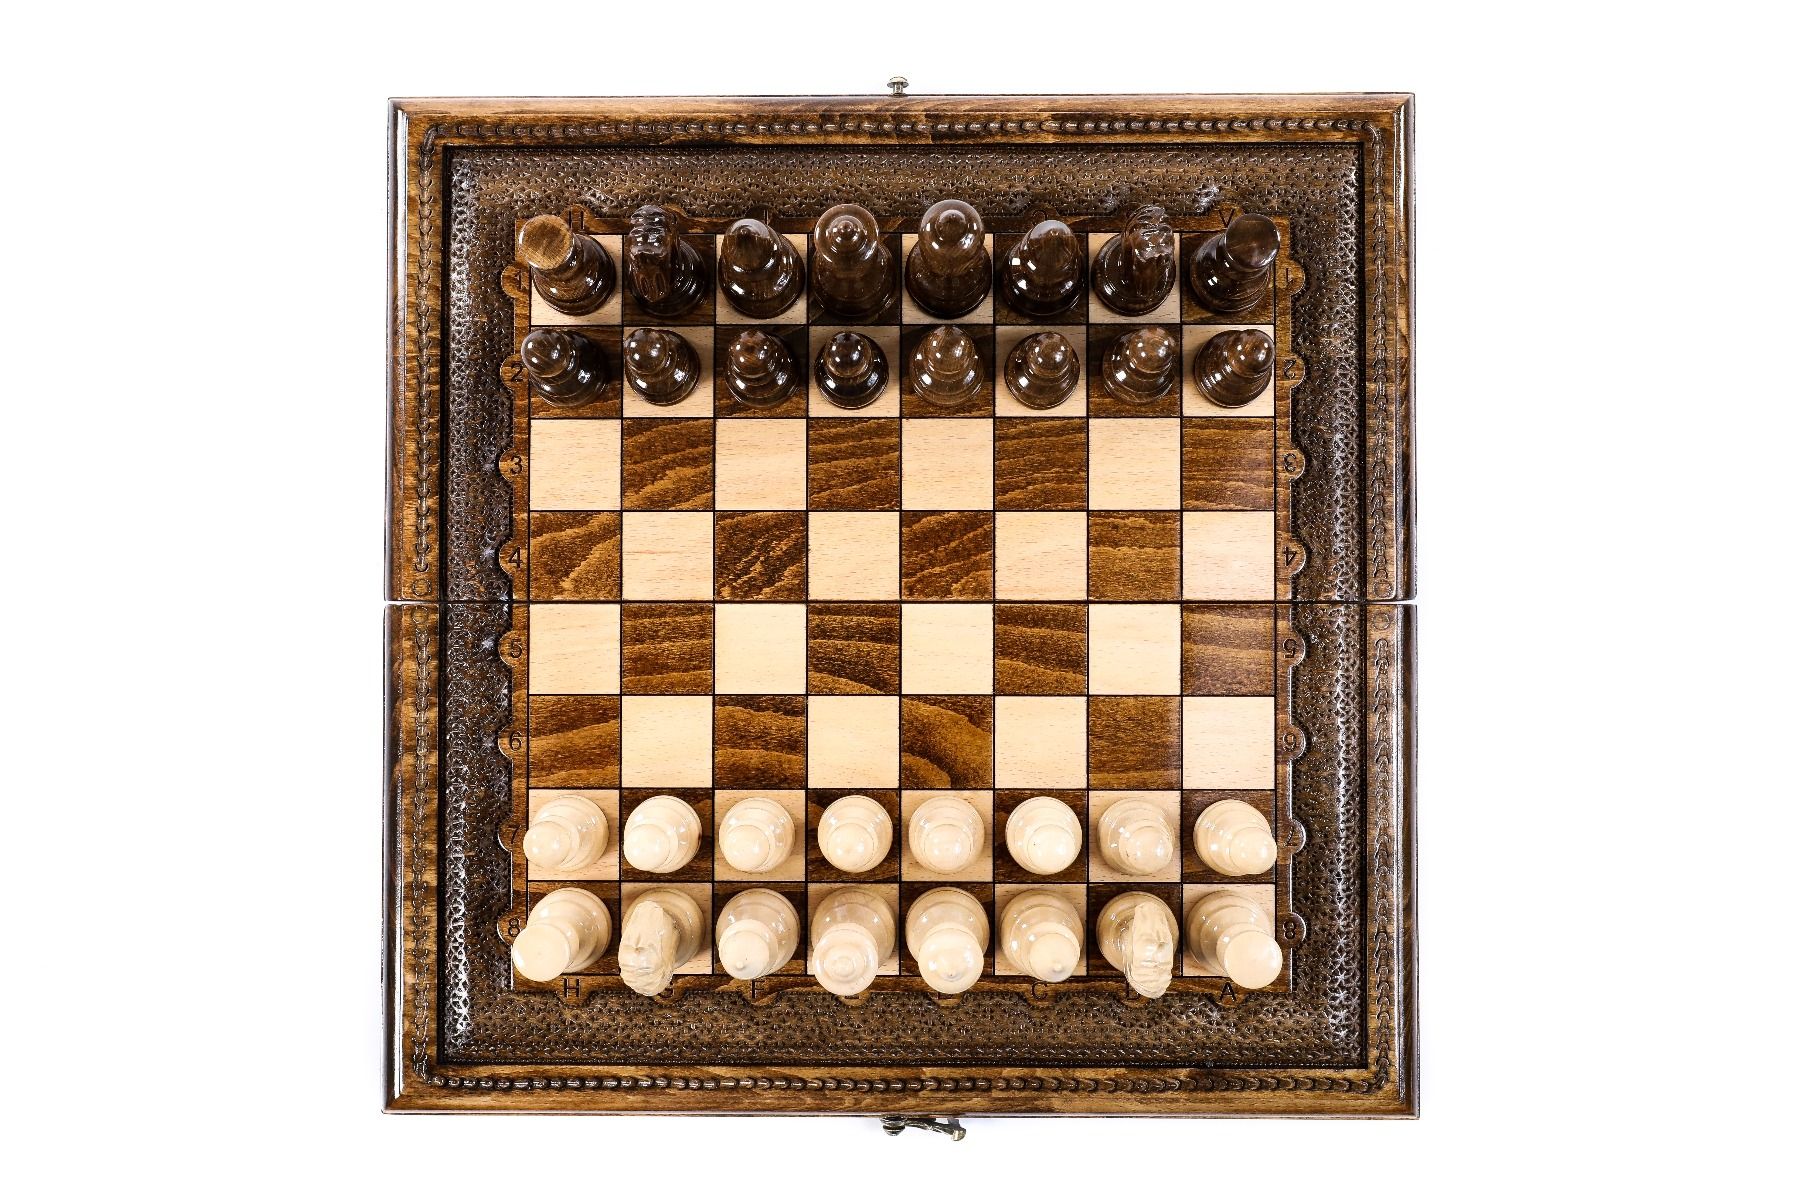 Master two classic games with a luxury set, blending the rich texture of handcrafted artistry with timeless gameplay.